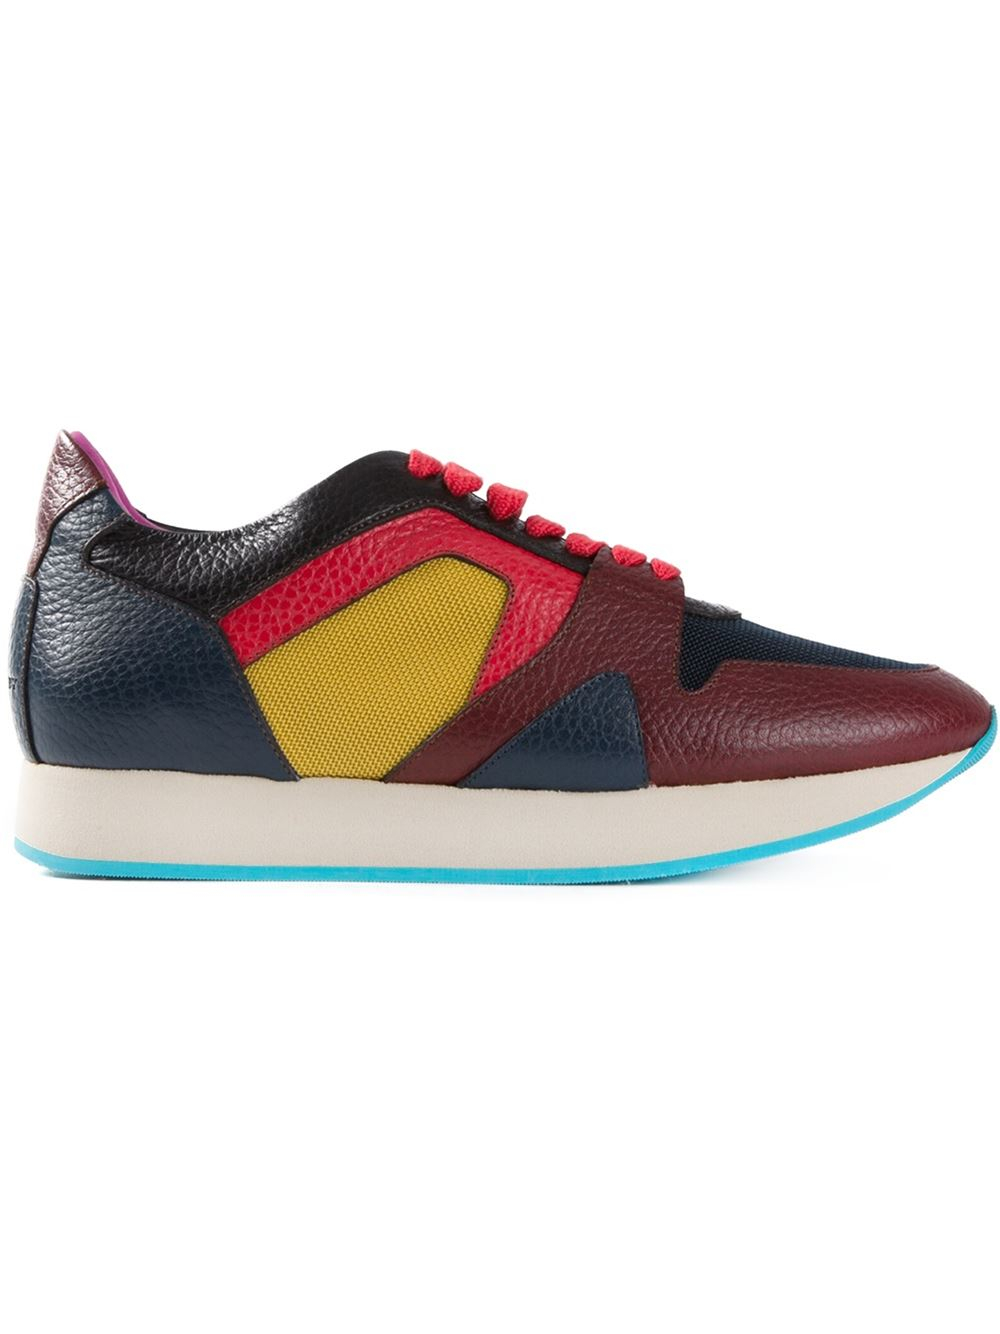 Burberry Prorsum The Field Color-Block Sneakers | Lyst UK